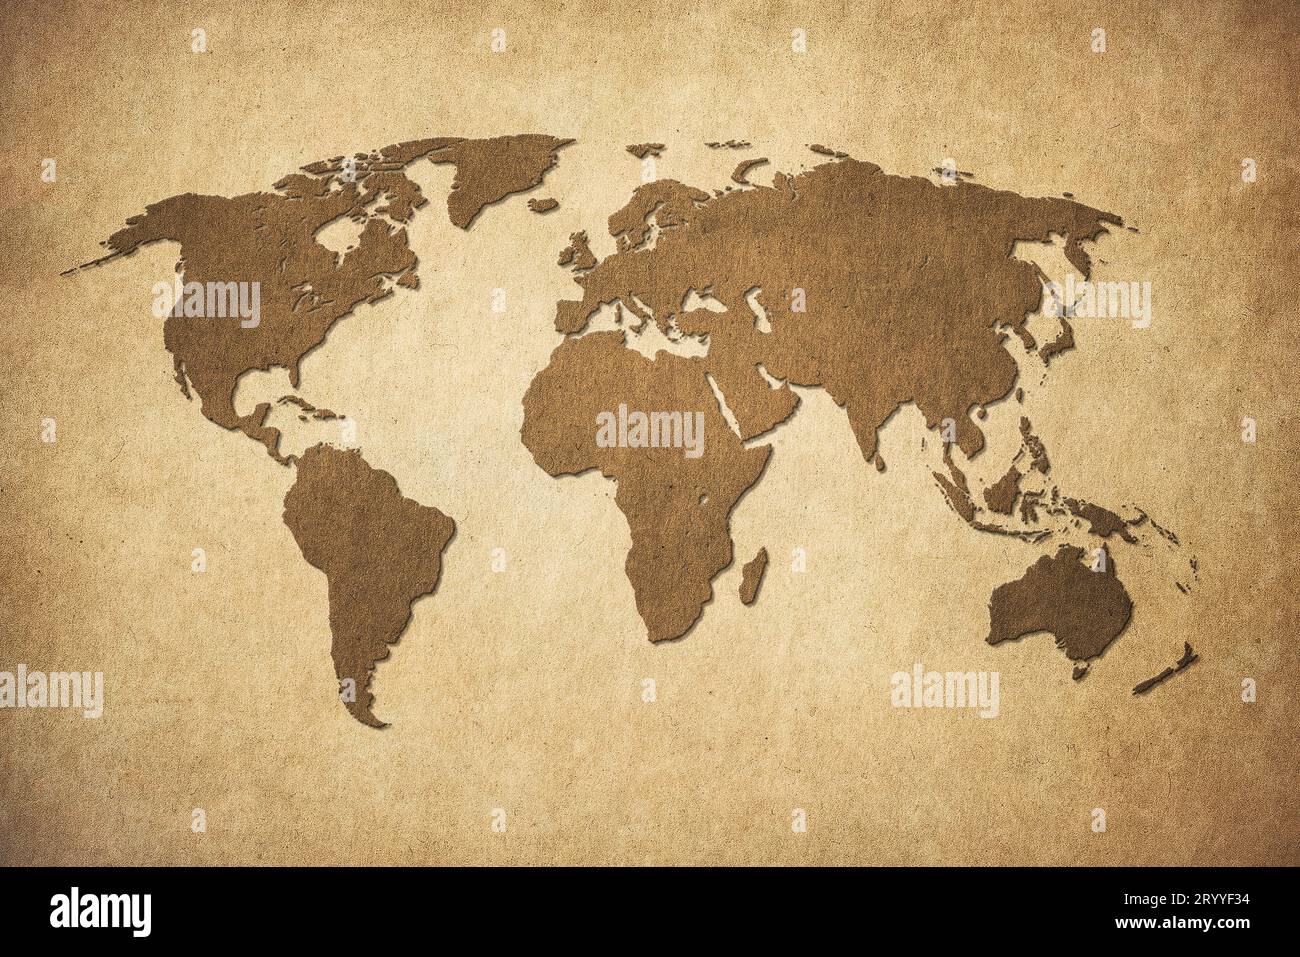 Old map of the world in grunge style. Perfect vintage background. Stock Photo